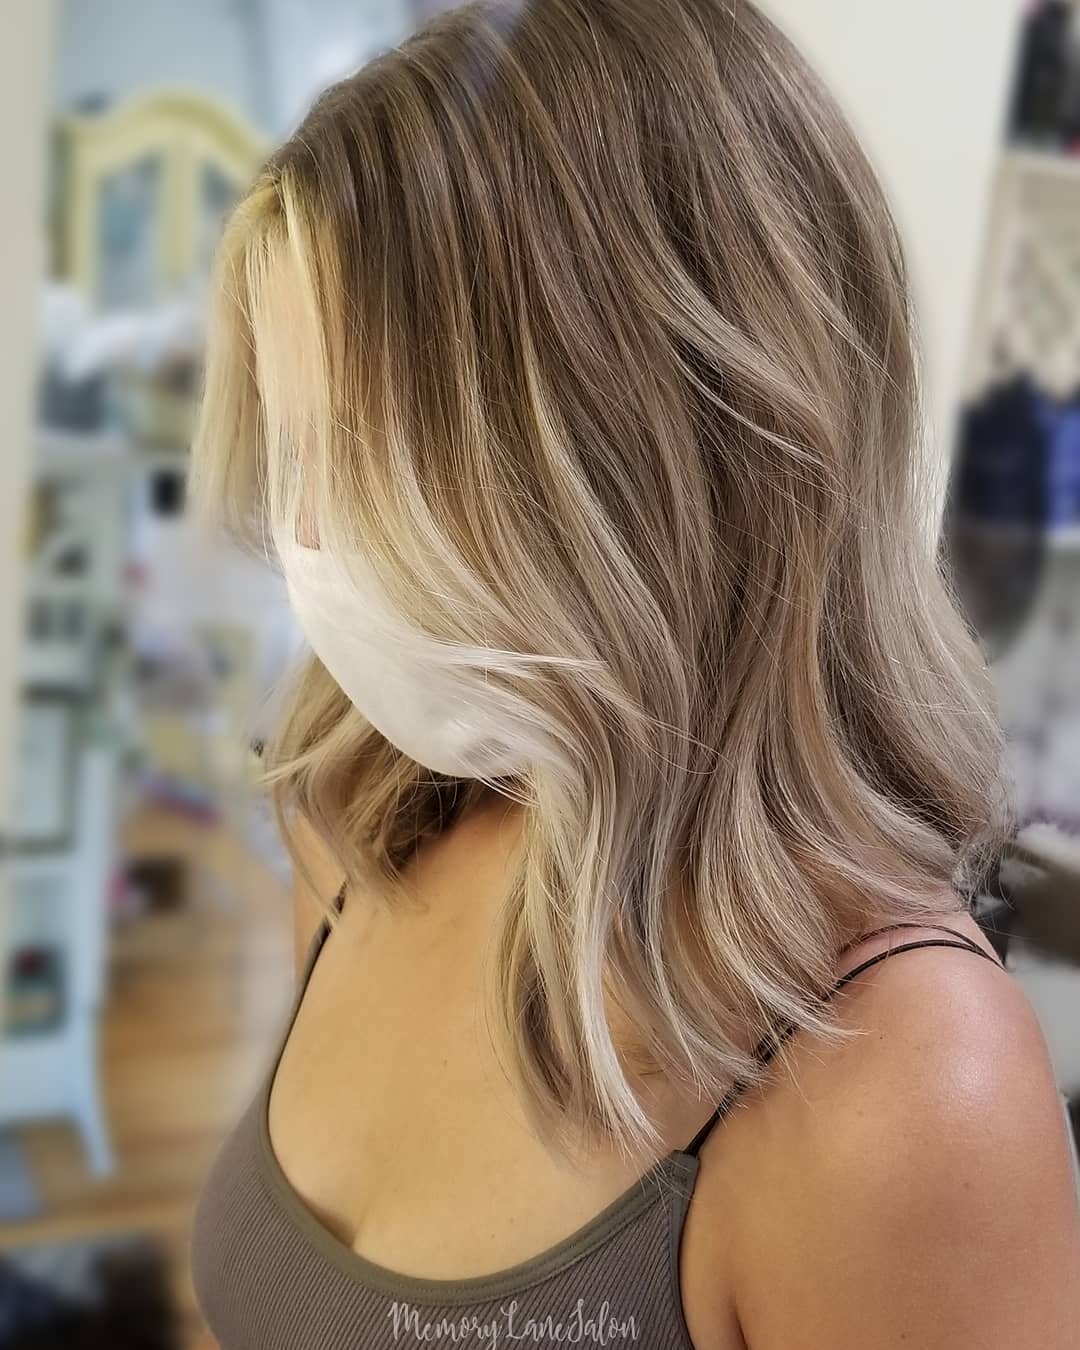 Just a few #babylights and a #moneypiece for this beautiful canvas!😍 @amanda__claire_99 
Gotta have beautiful back to school hair no matter what! I hope your last year at college is so successful sweetie! 🧡🍂🍁